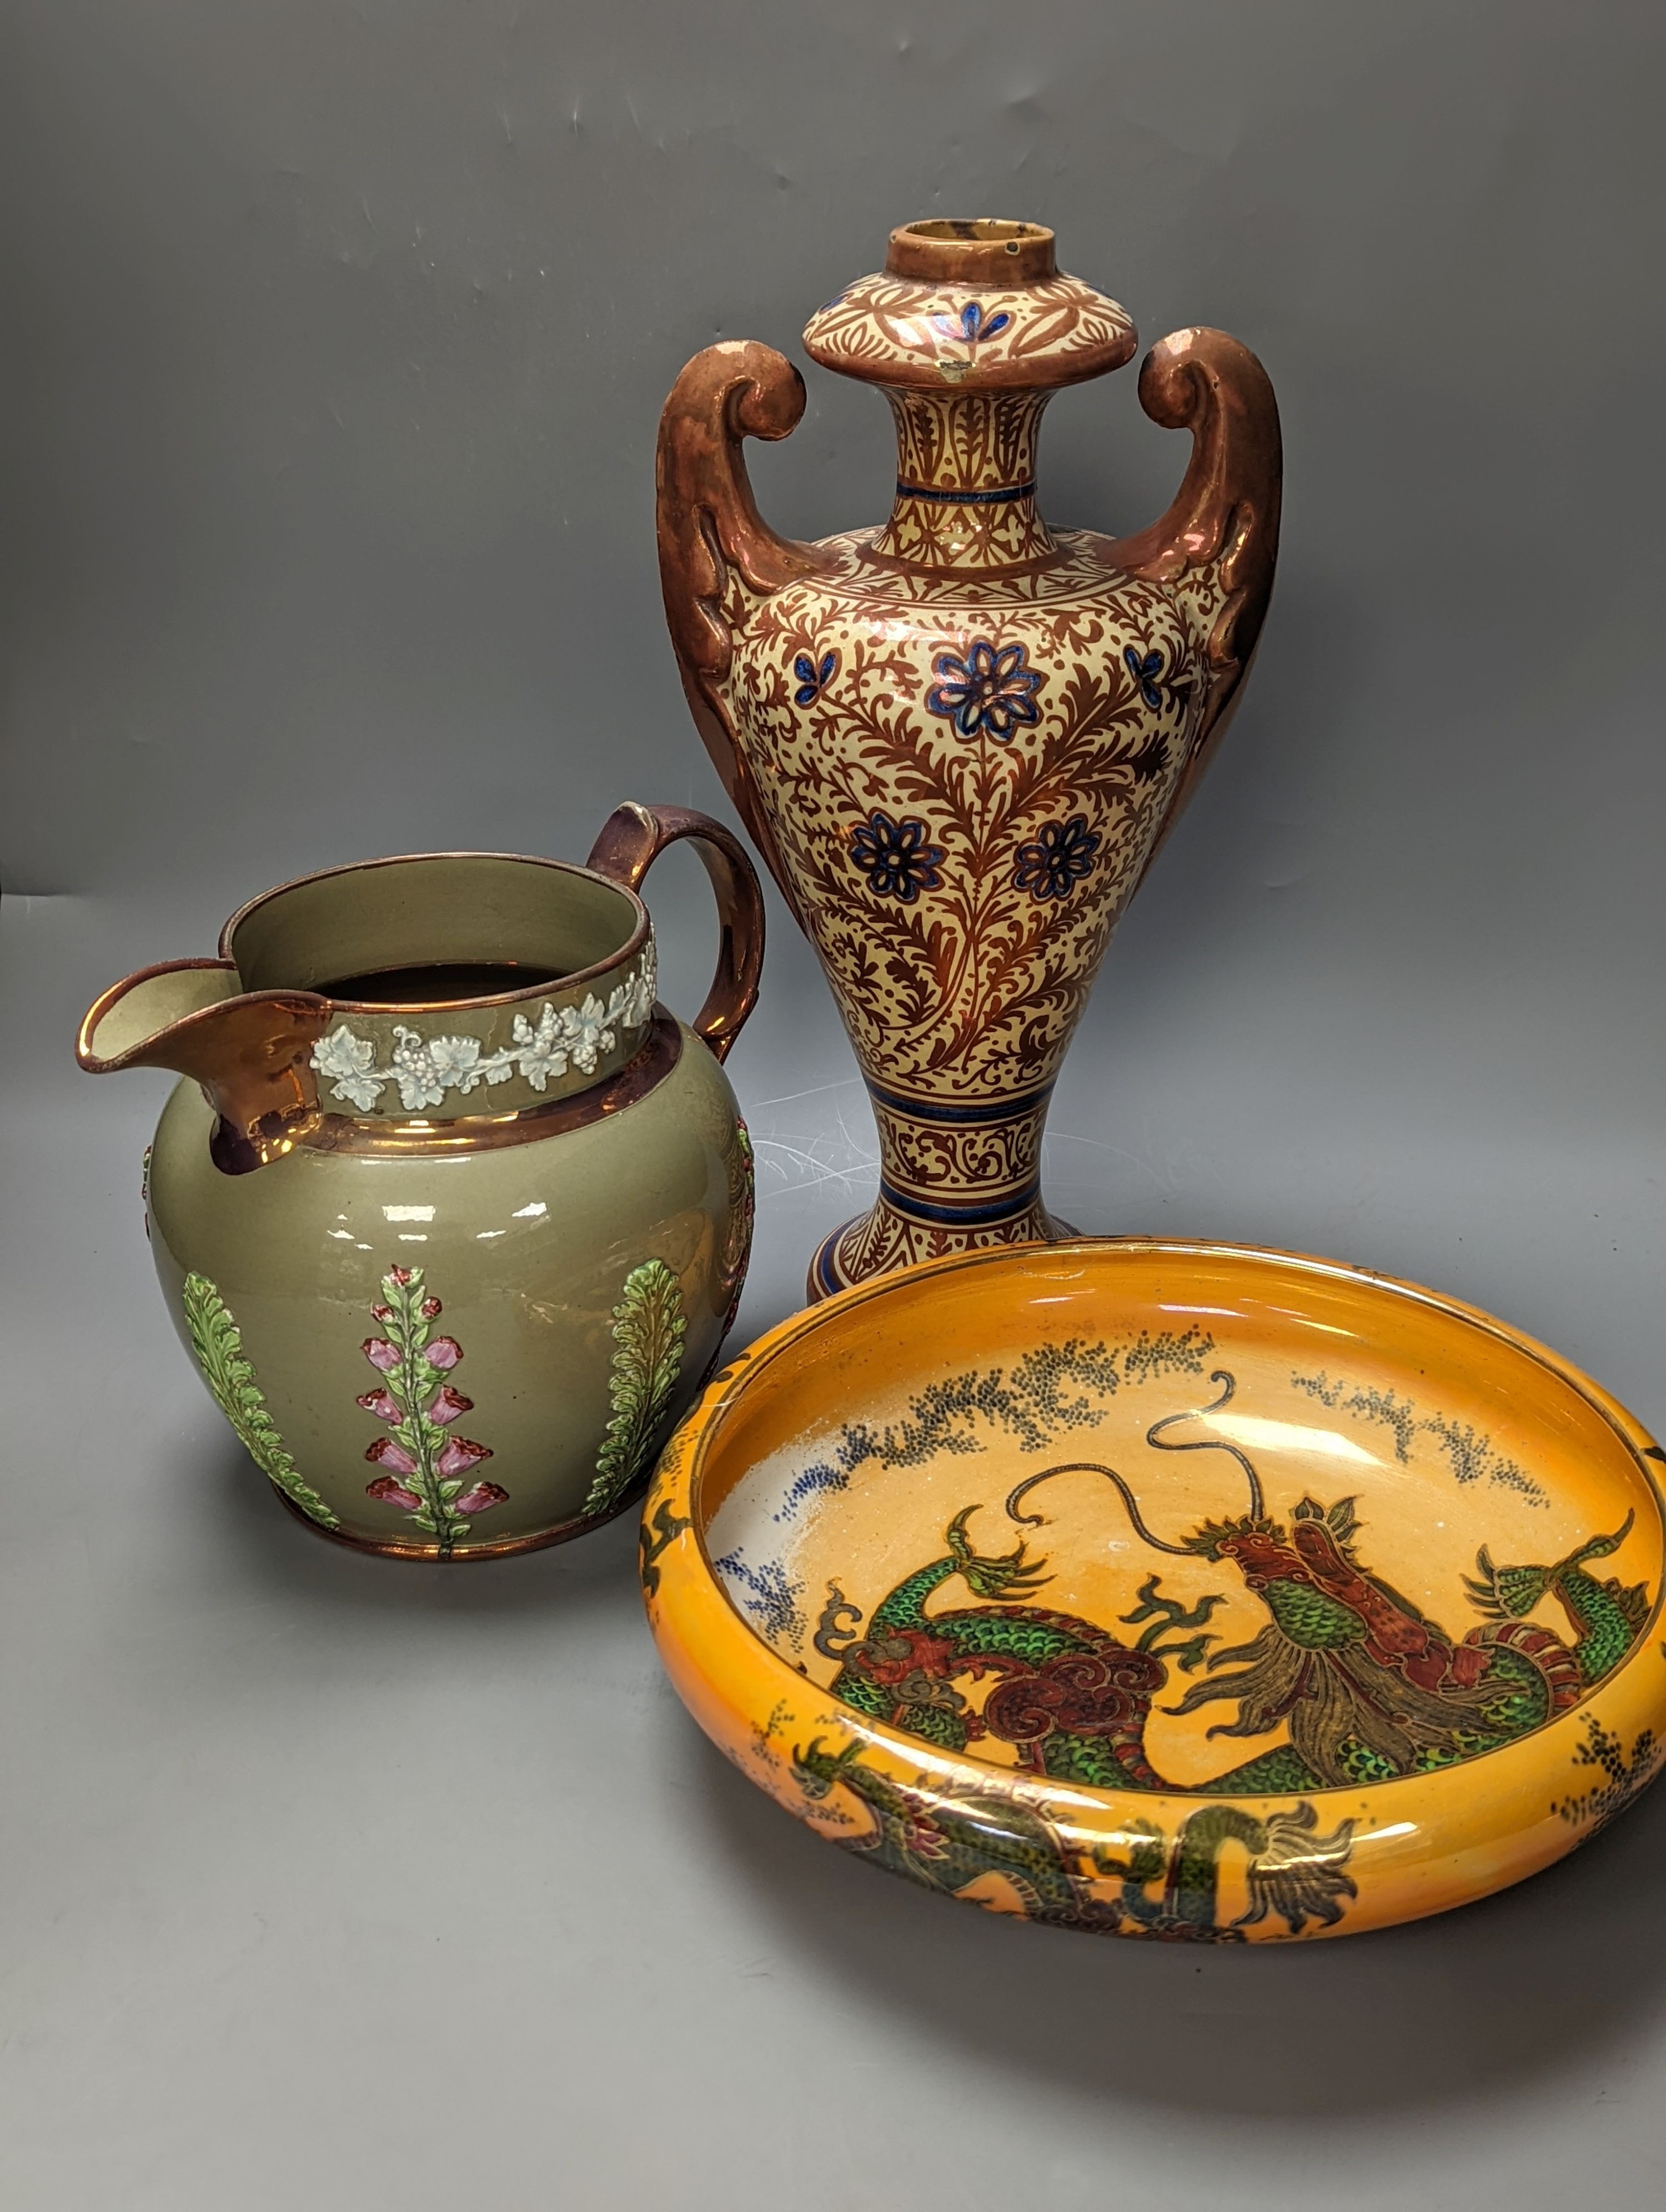 A Burley ware lustre dragon bowl, a lustre and fox glove designed jug and a Hispano-Moresque style copper lustre vase, Vase 38 cms high.